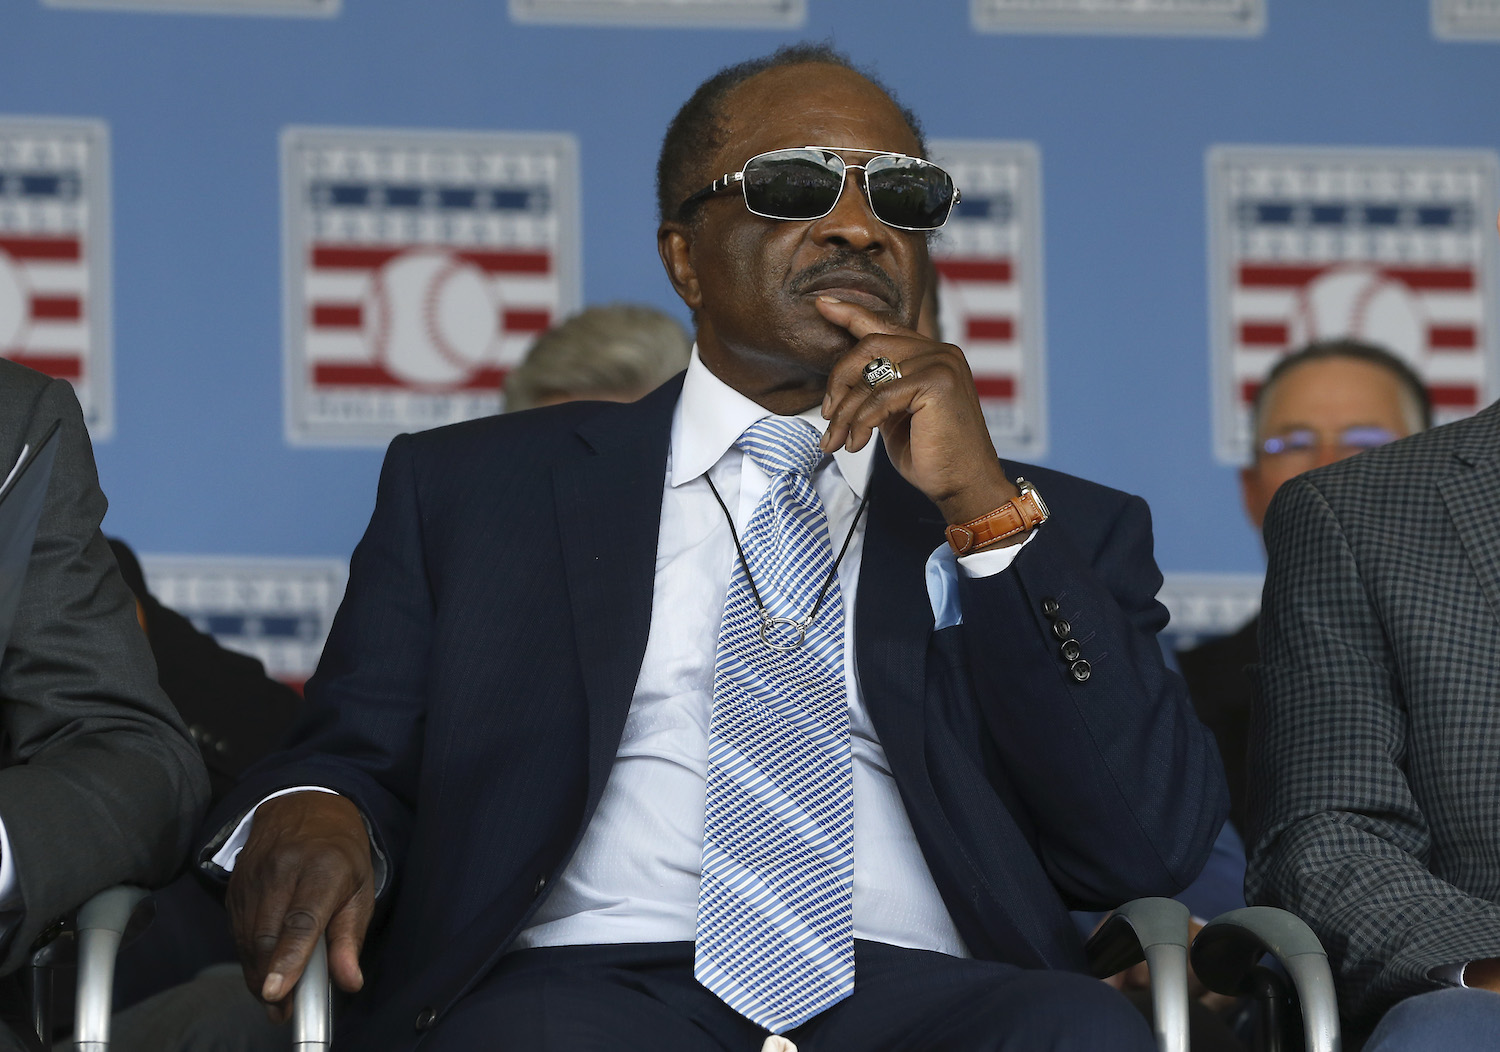 Joe Morgan Once Challenged an Exasperated Spike Lee in the Broadcast Booth